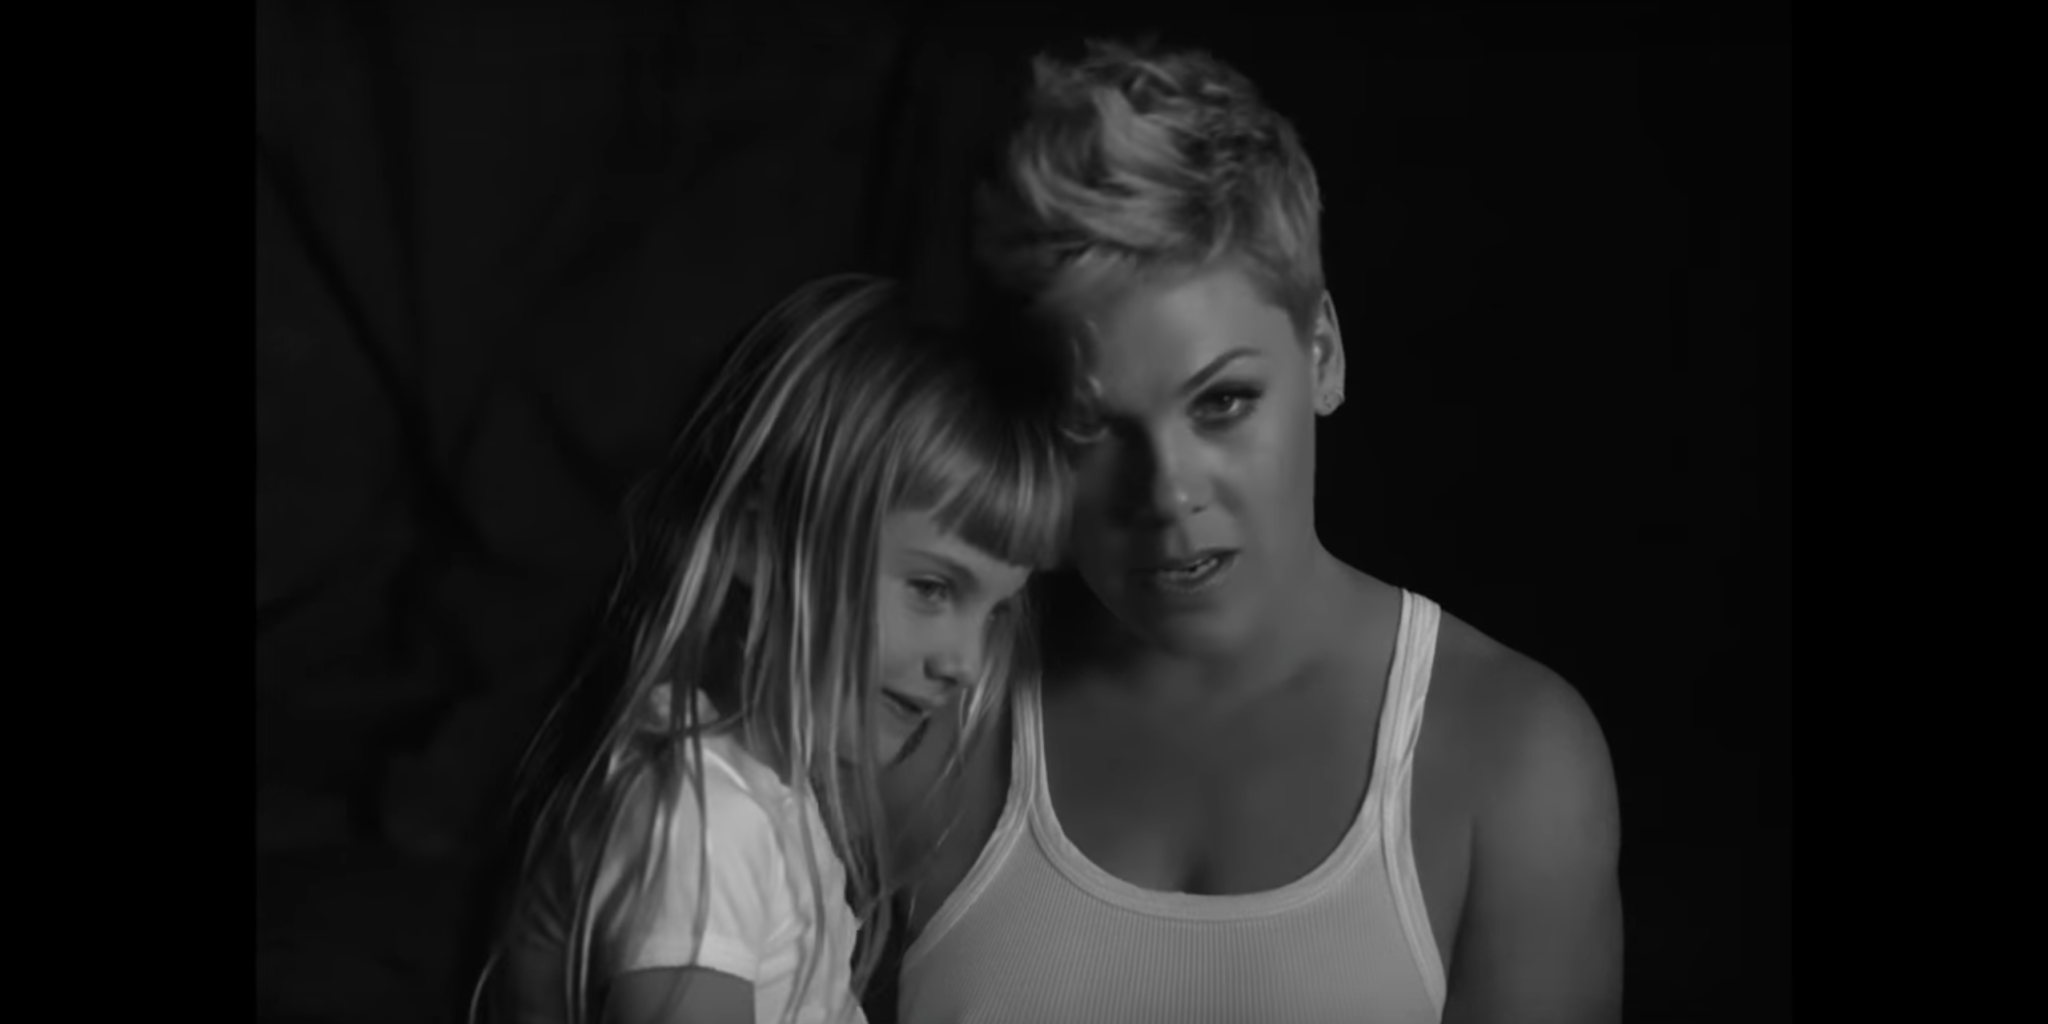 p!nk - wild hearts can